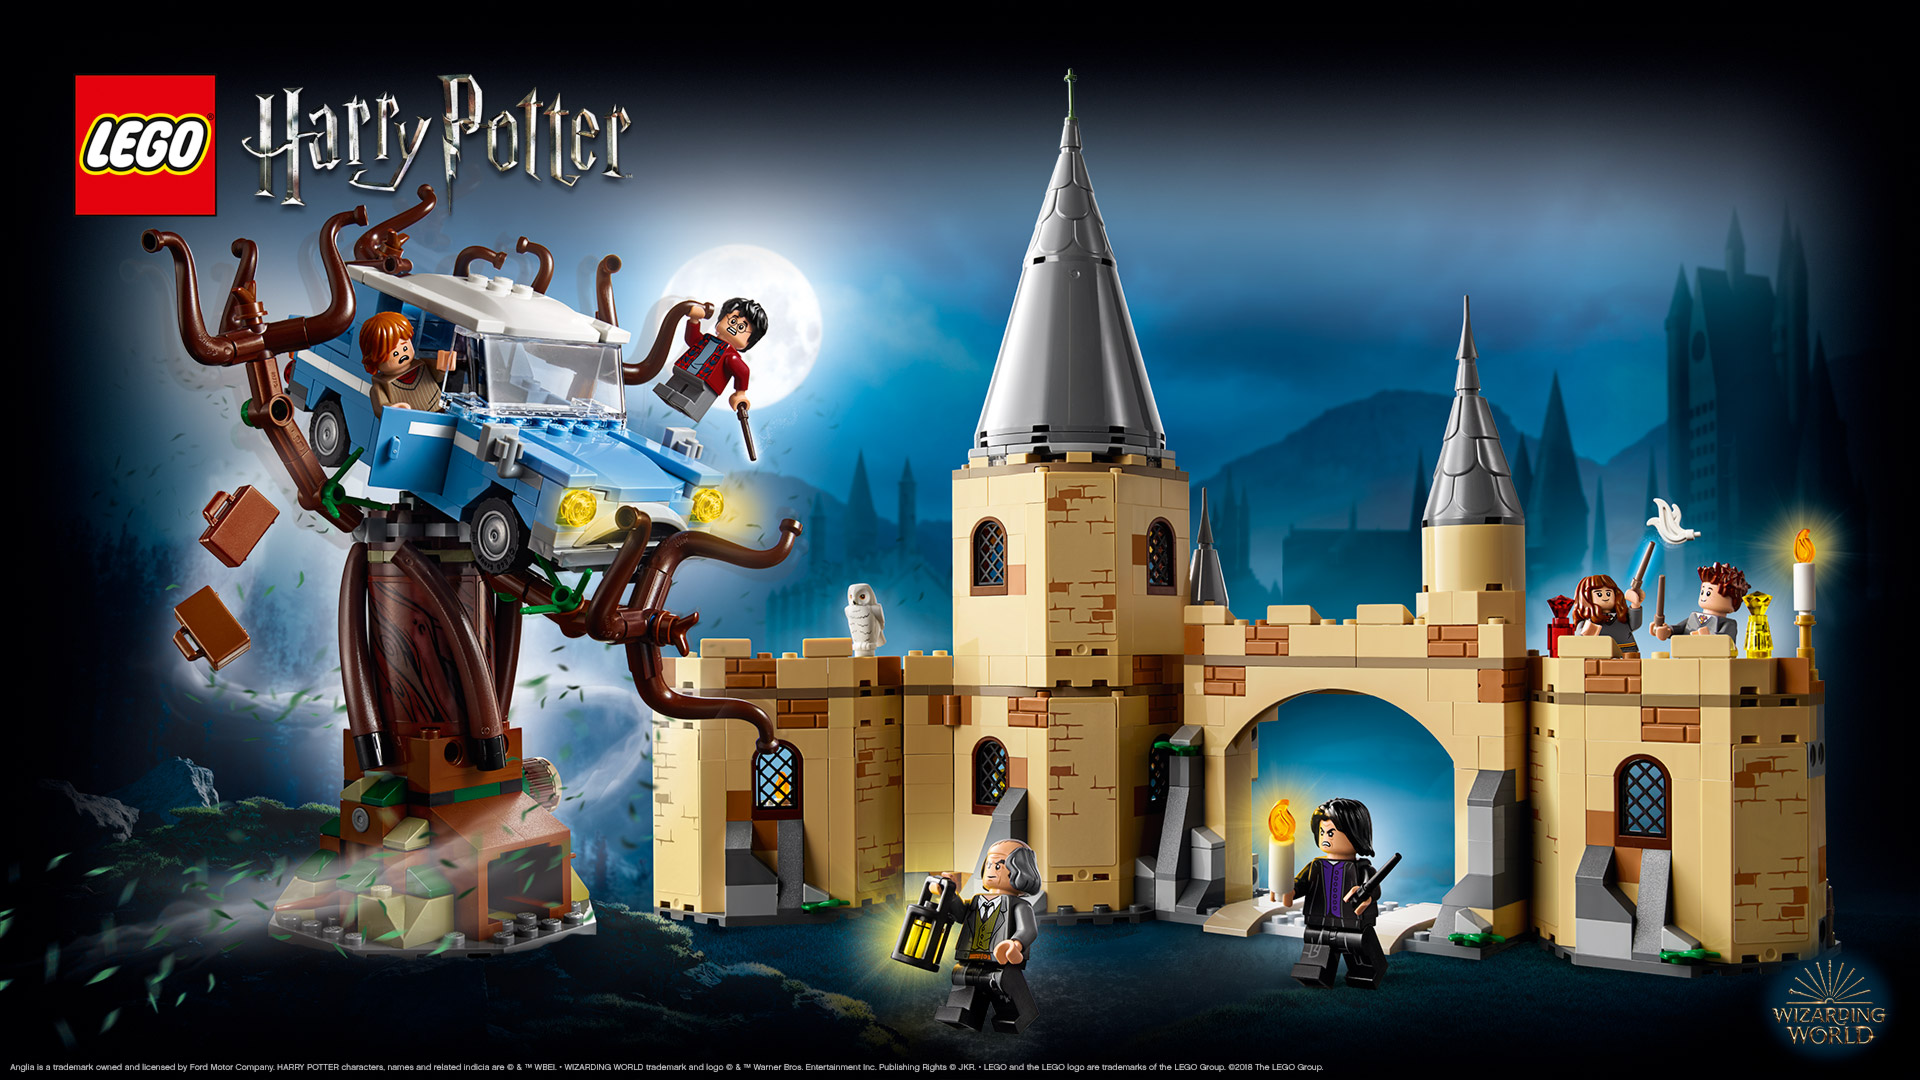 75953 Hogwarts™ Whomping Willow™ - Lego Harry Potter Hogwarts Whomping Willow , HD Wallpaper & Backgrounds